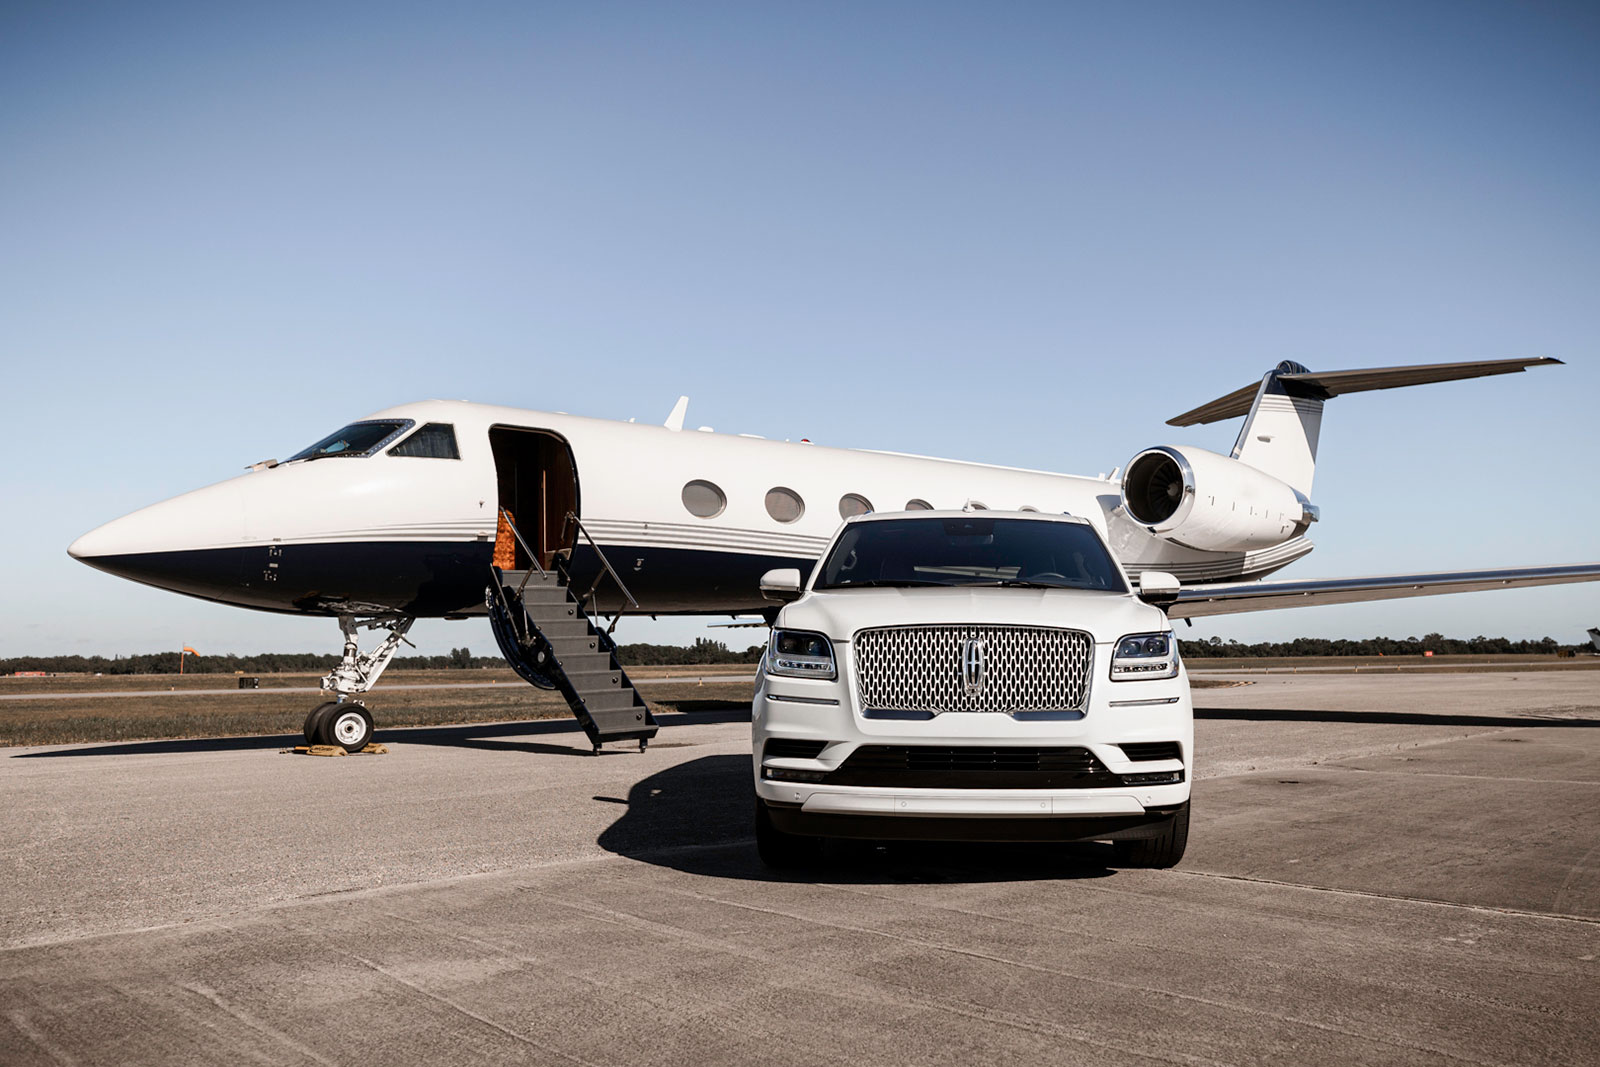 Aeraway jet on runway with Cadiallac Escalade